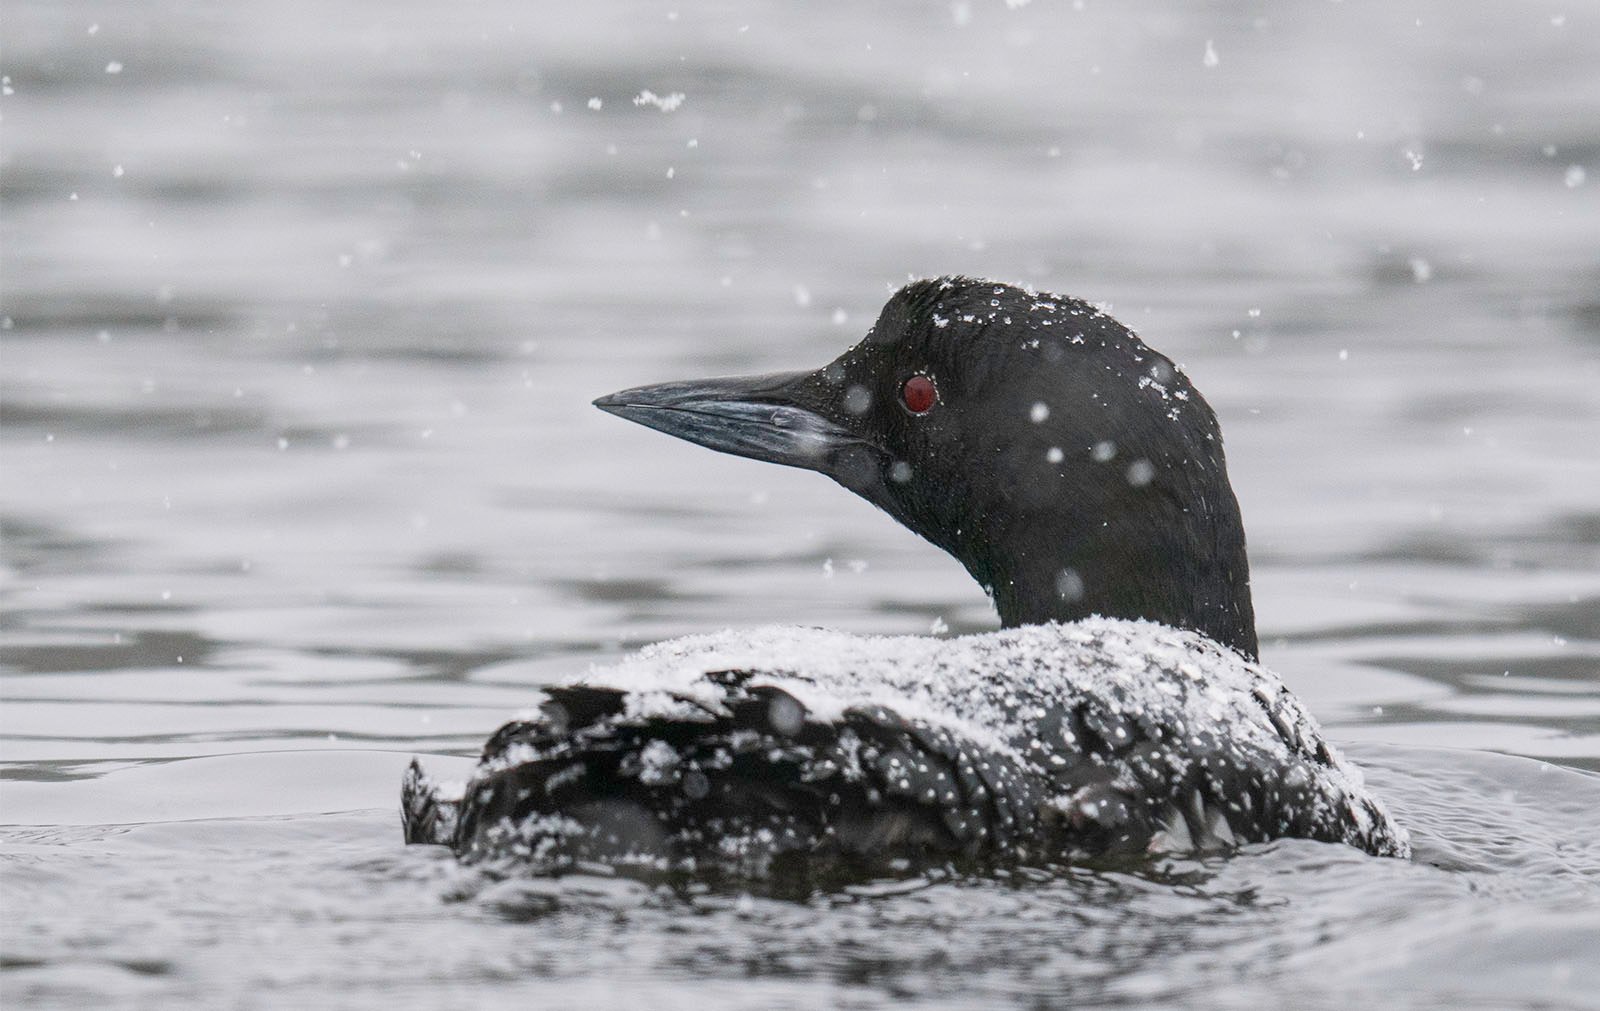 A common loon with striking red eyes appears on a cold lake, its black feathers dusted with light snowflakes against a blur of falling snow in the background.